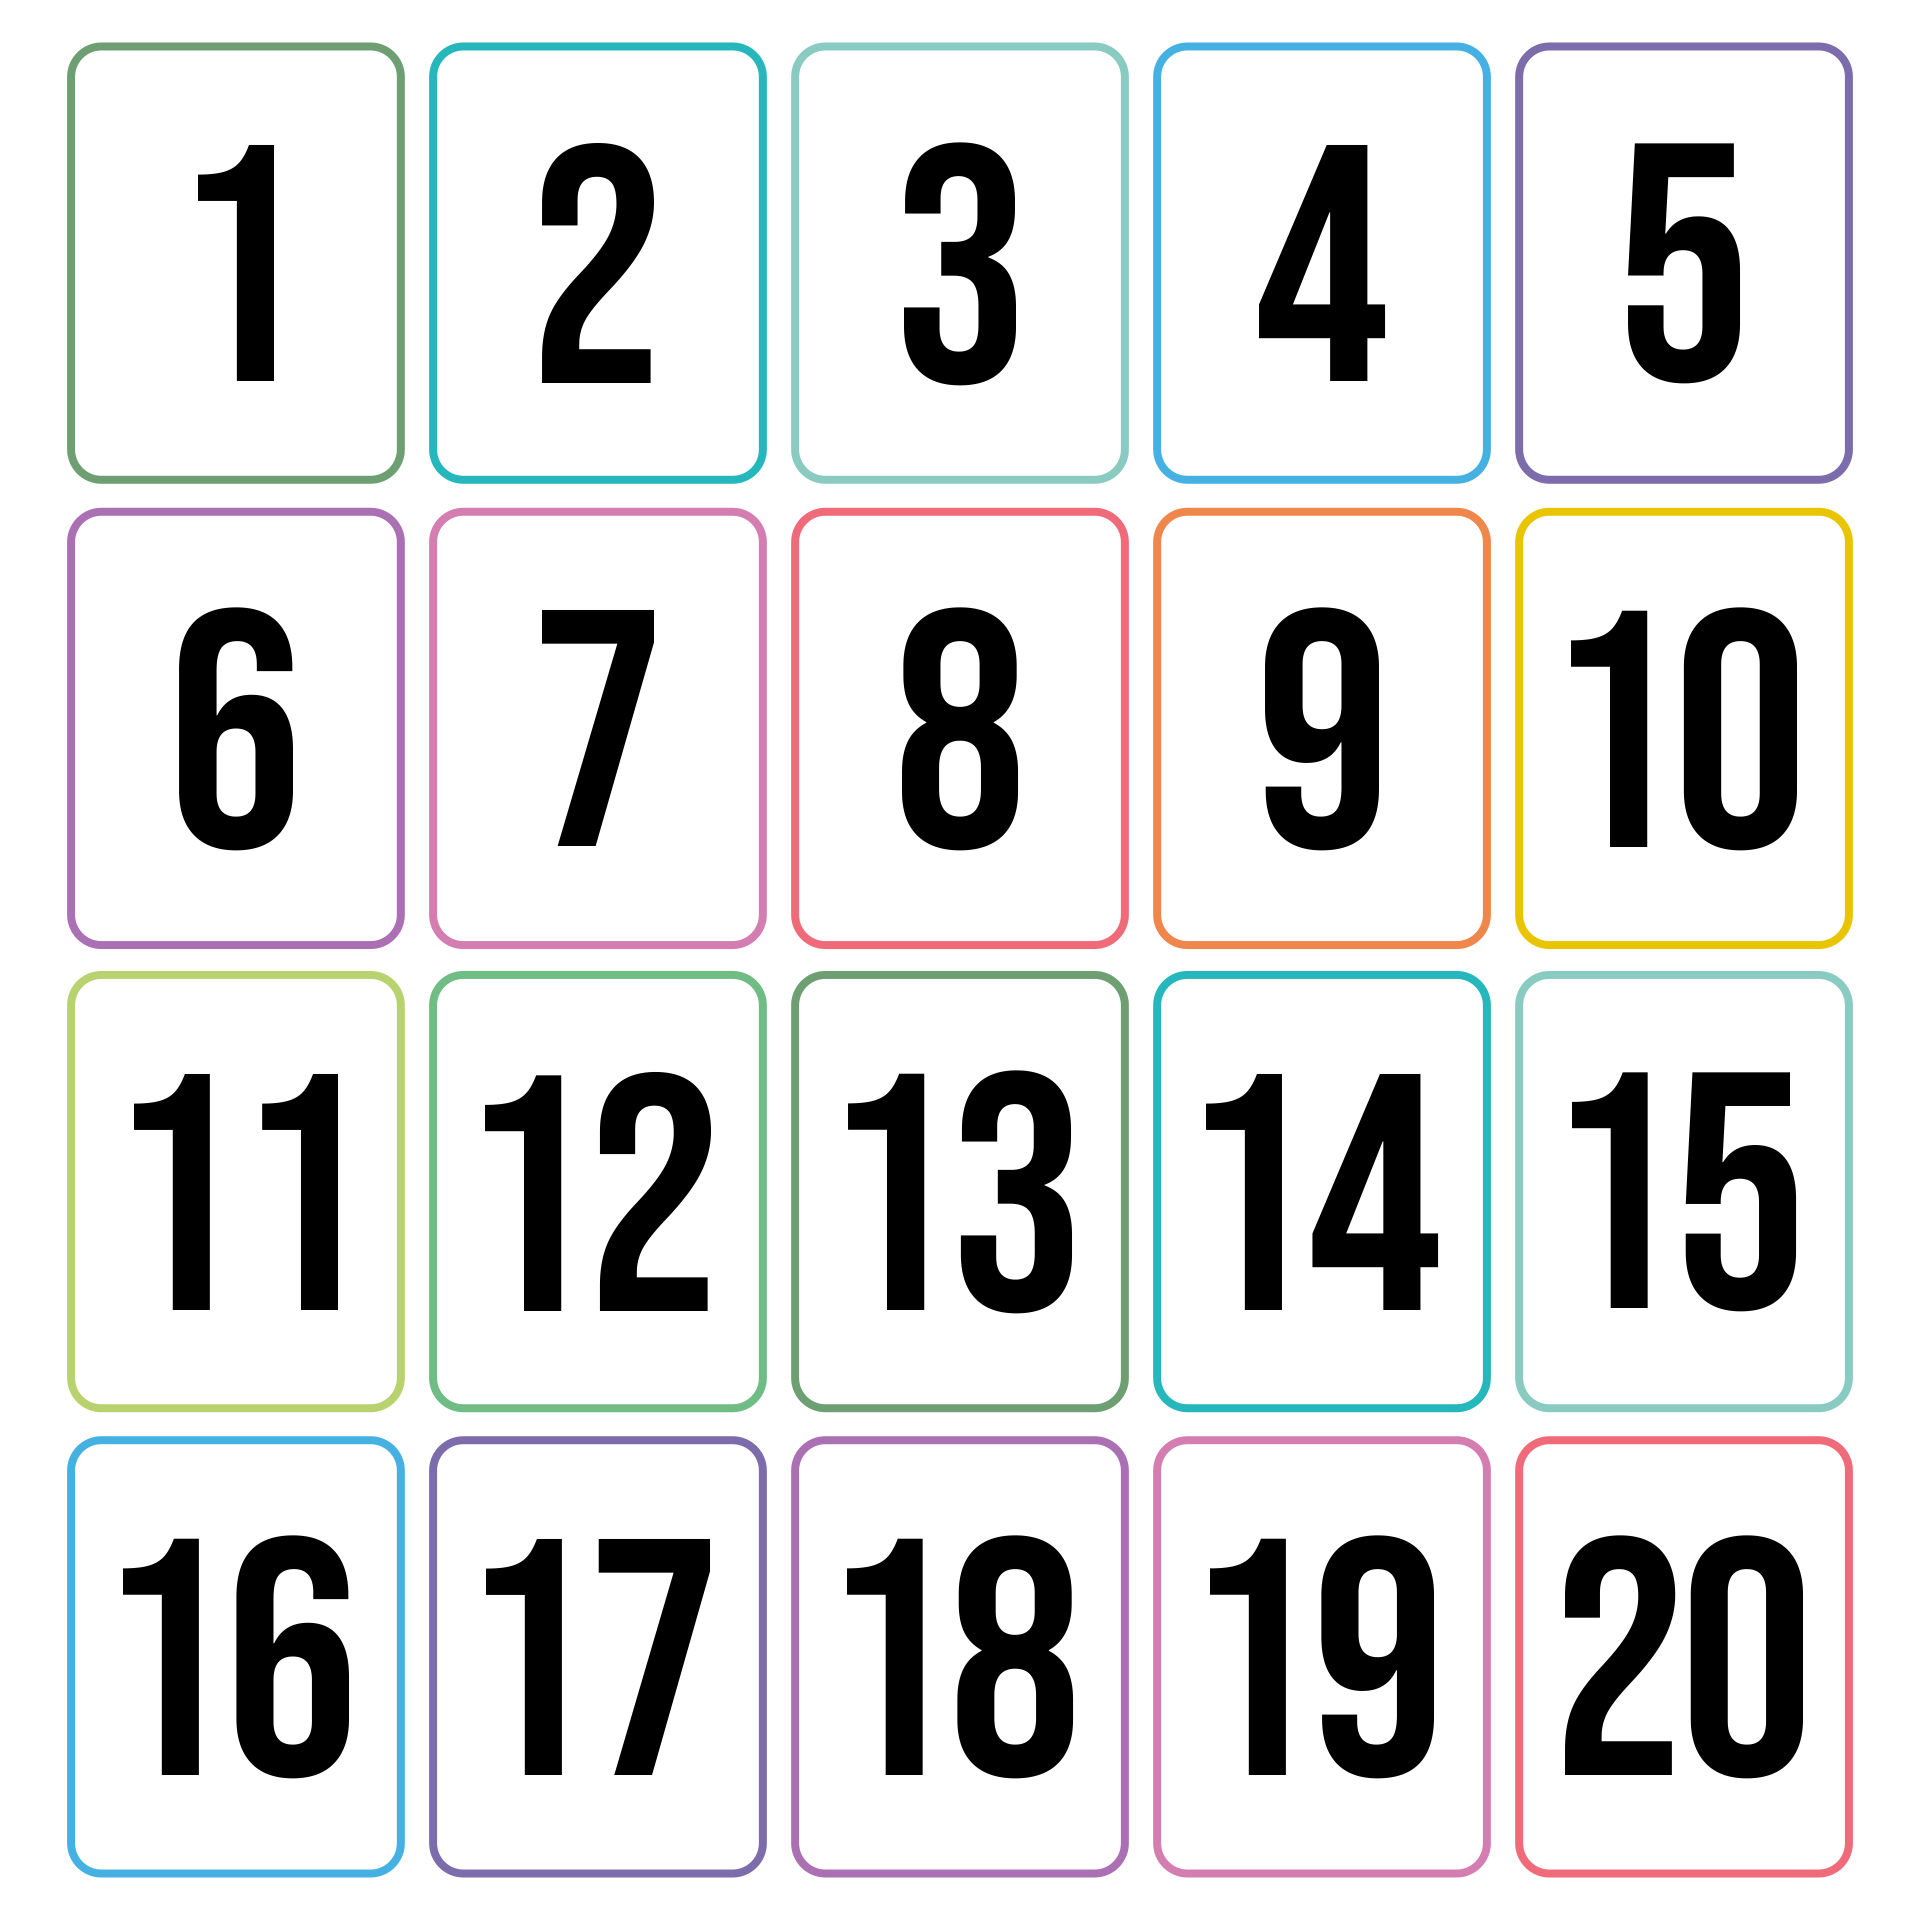 Number Flashcards 150 Printable Flashcards Of Numbers And Number